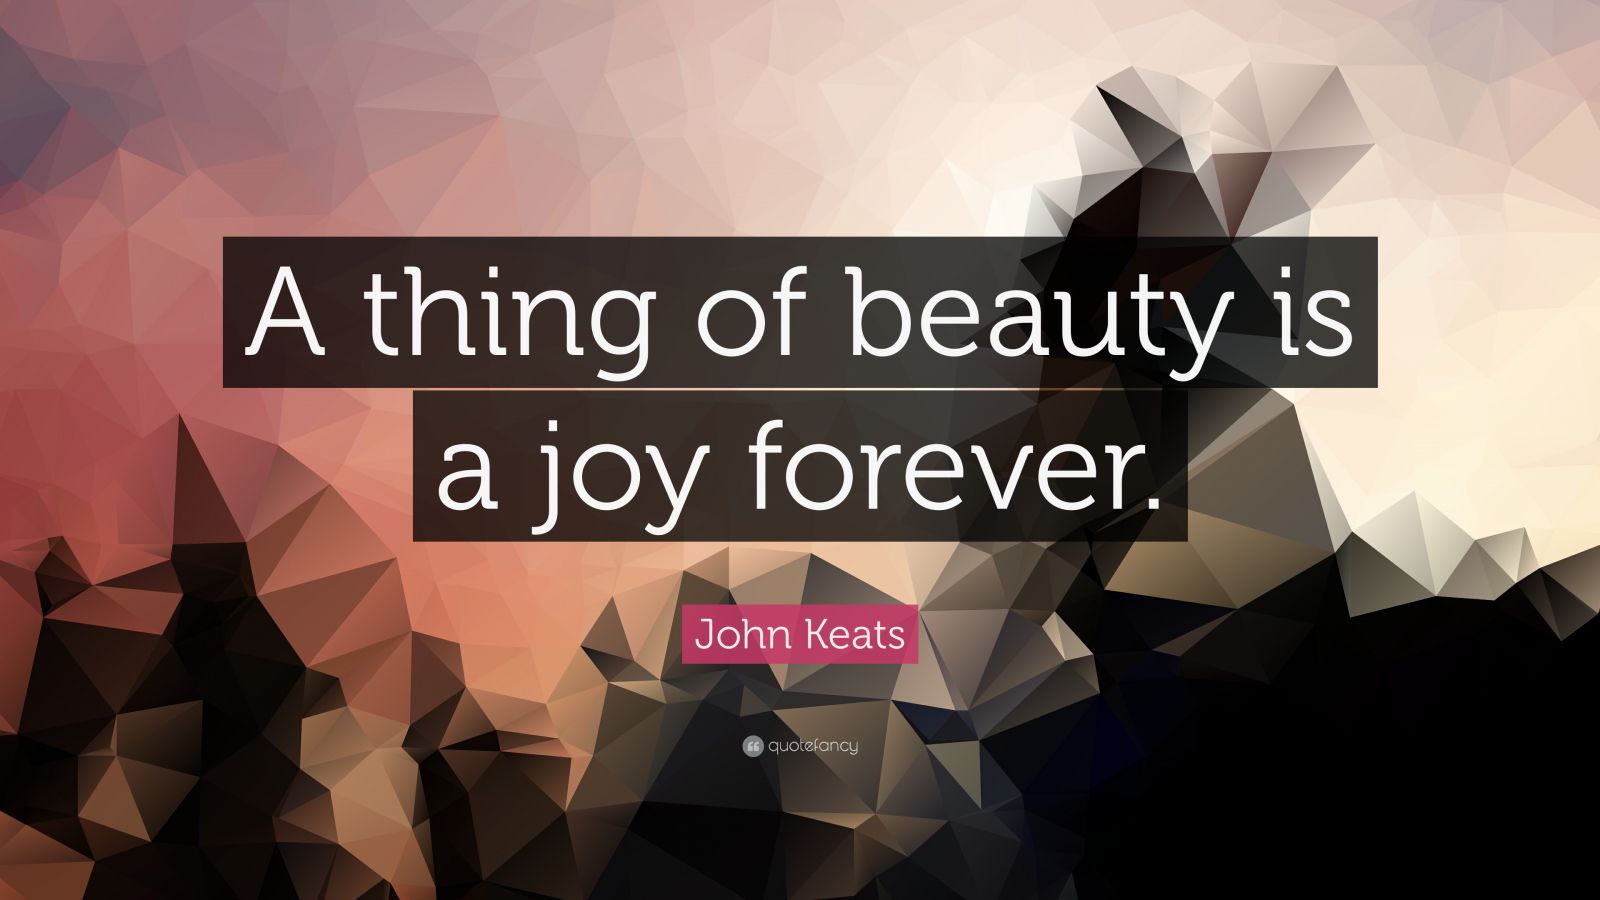 John Keats Quote: “A thing of beauty is a joy forever.” (12 wallpapers) - Quotefancy